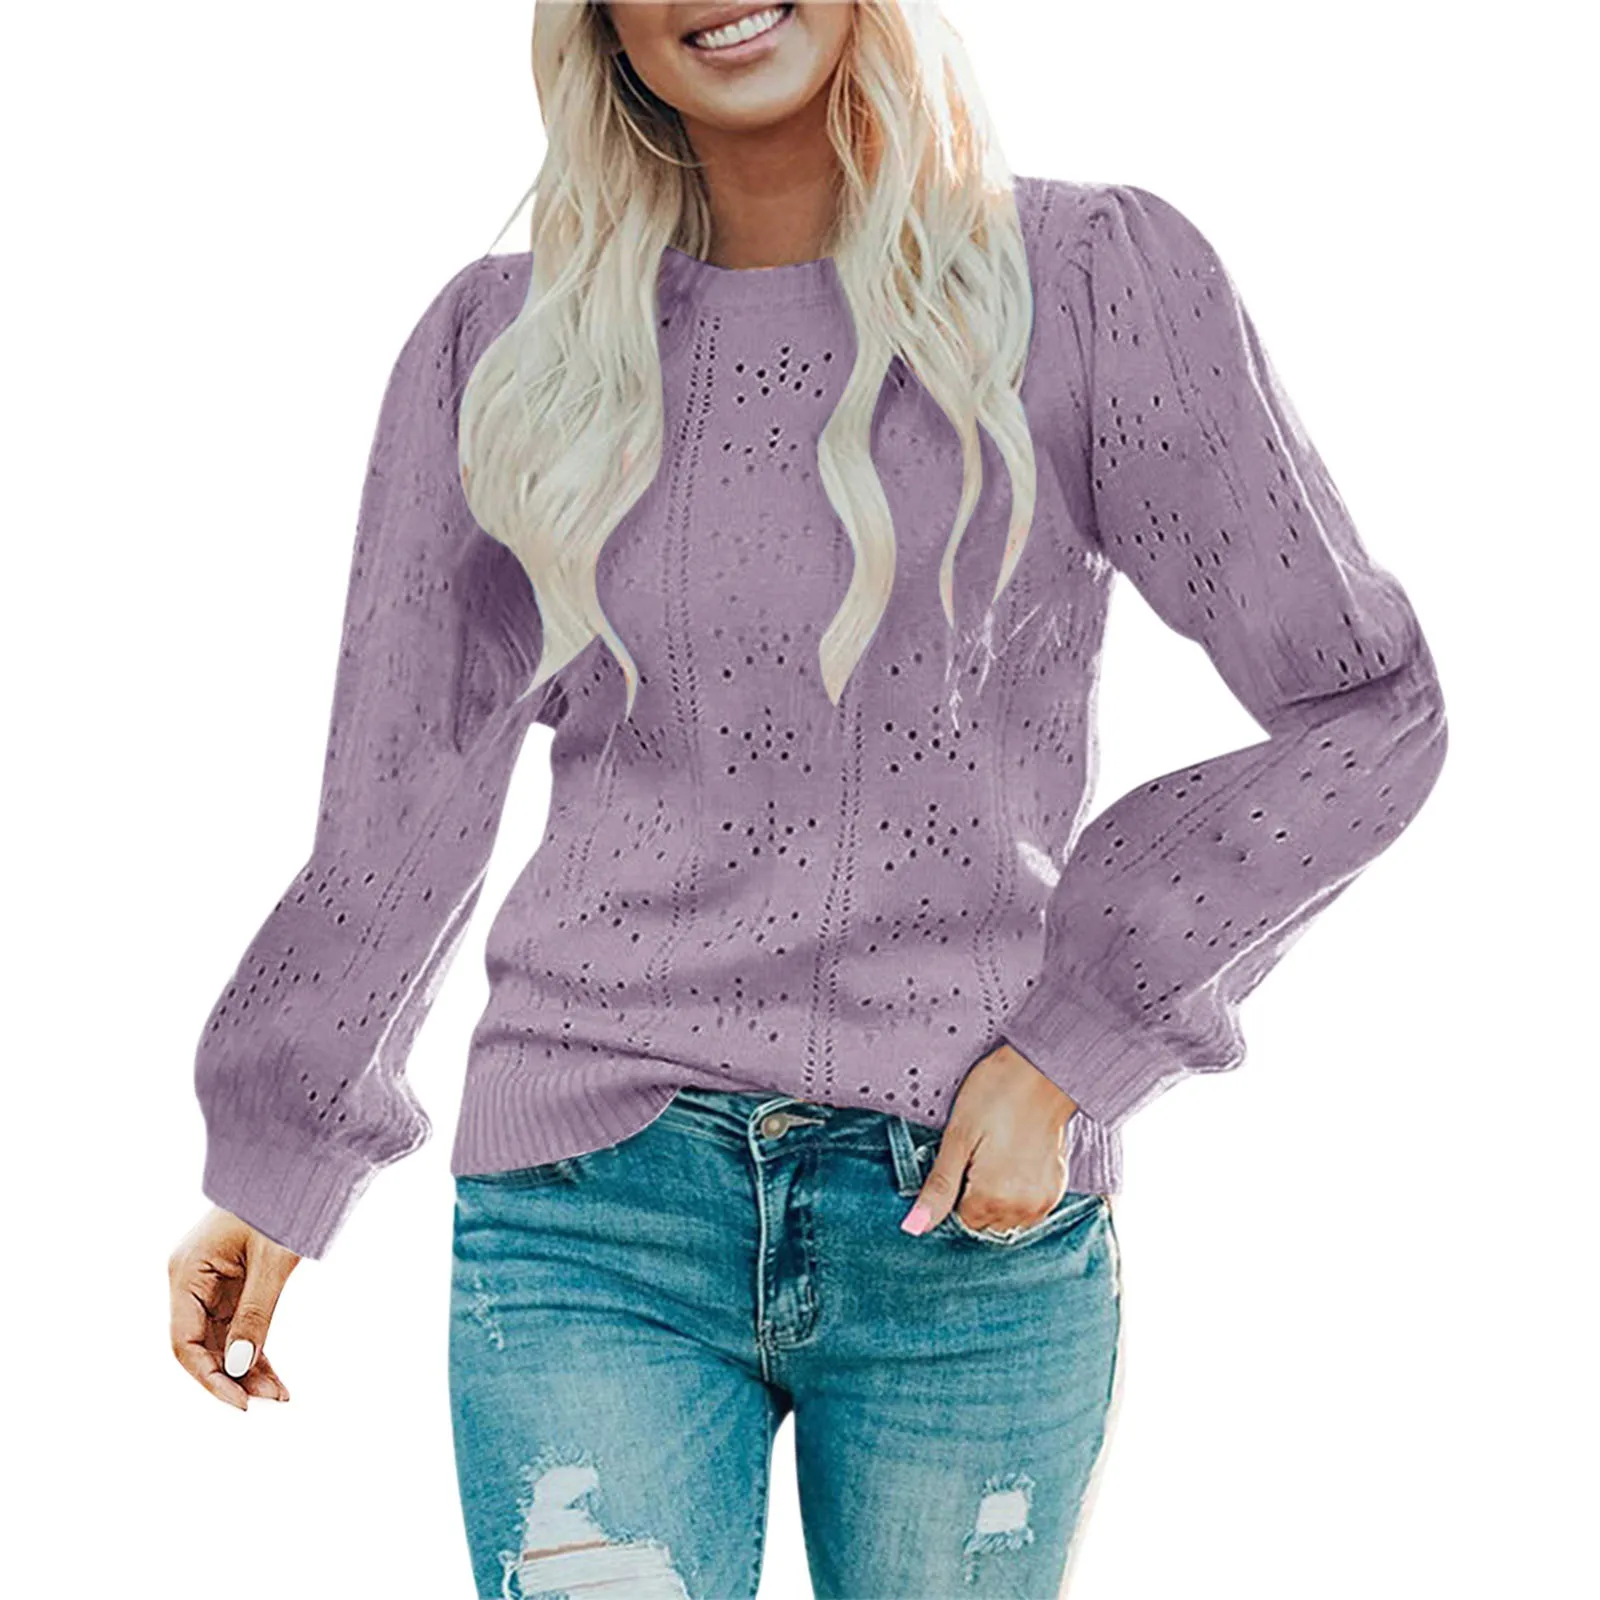 Women Fashion Solid Color Long Sleeve Round Neck Hollow Out Casual Top Sweater Woman Sweatshirt